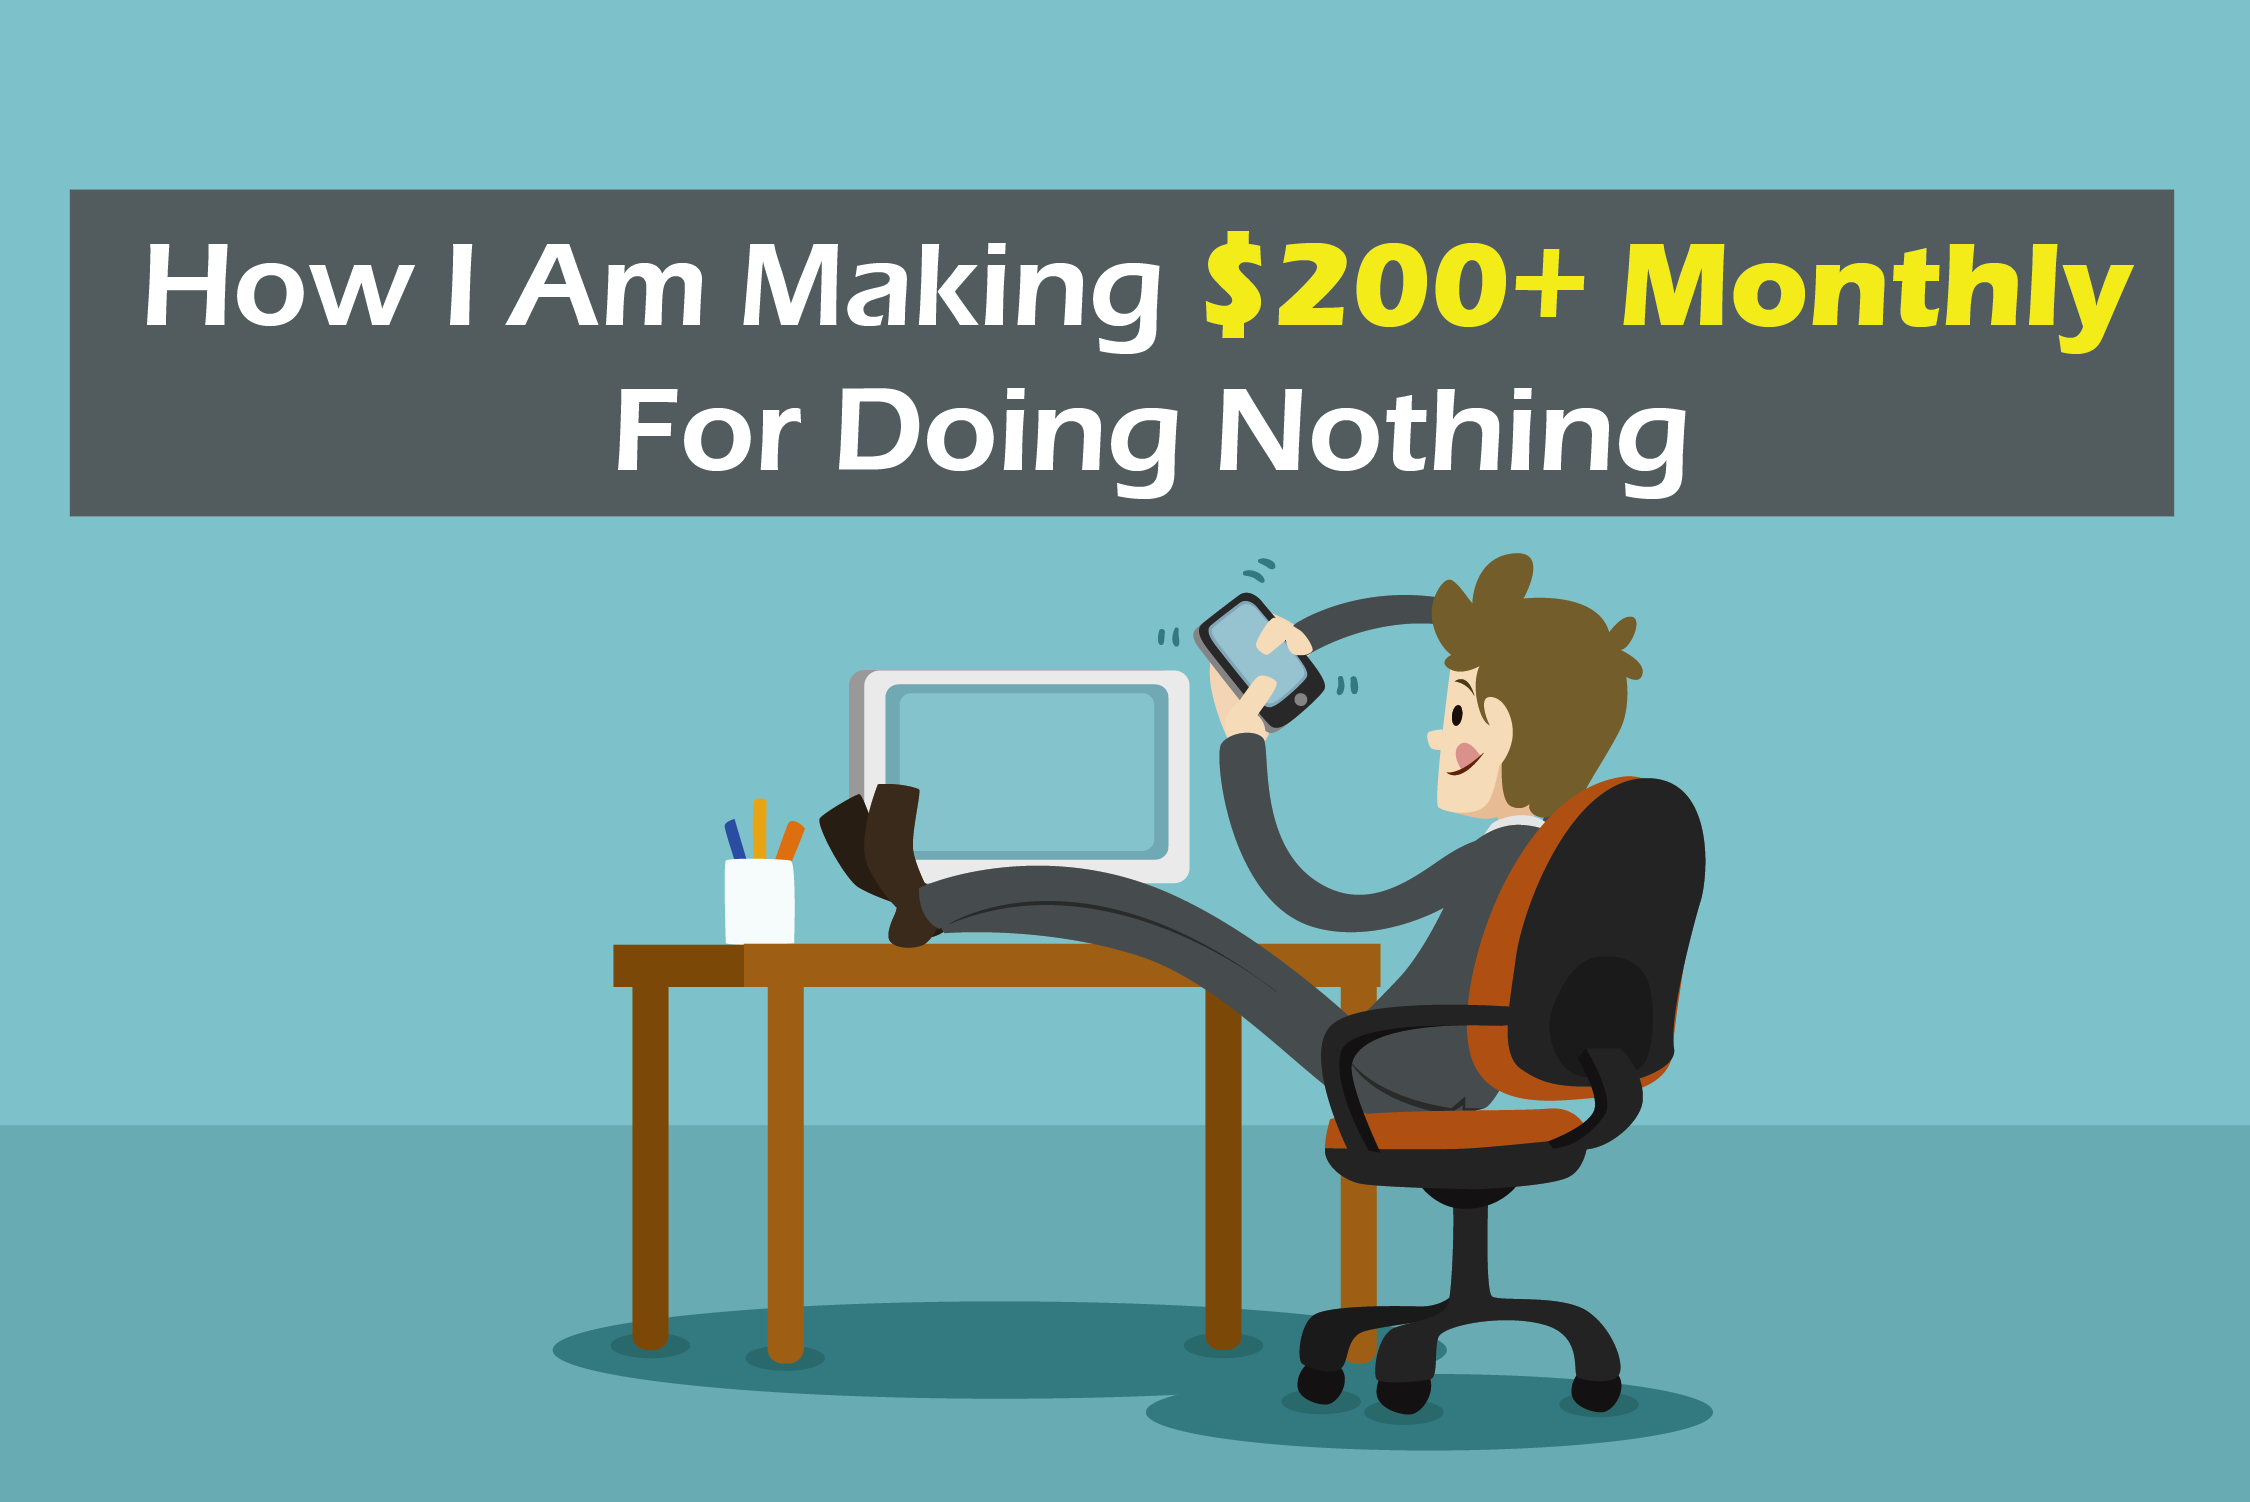 How I Am Making $200+ Monthly for Doing Nothing